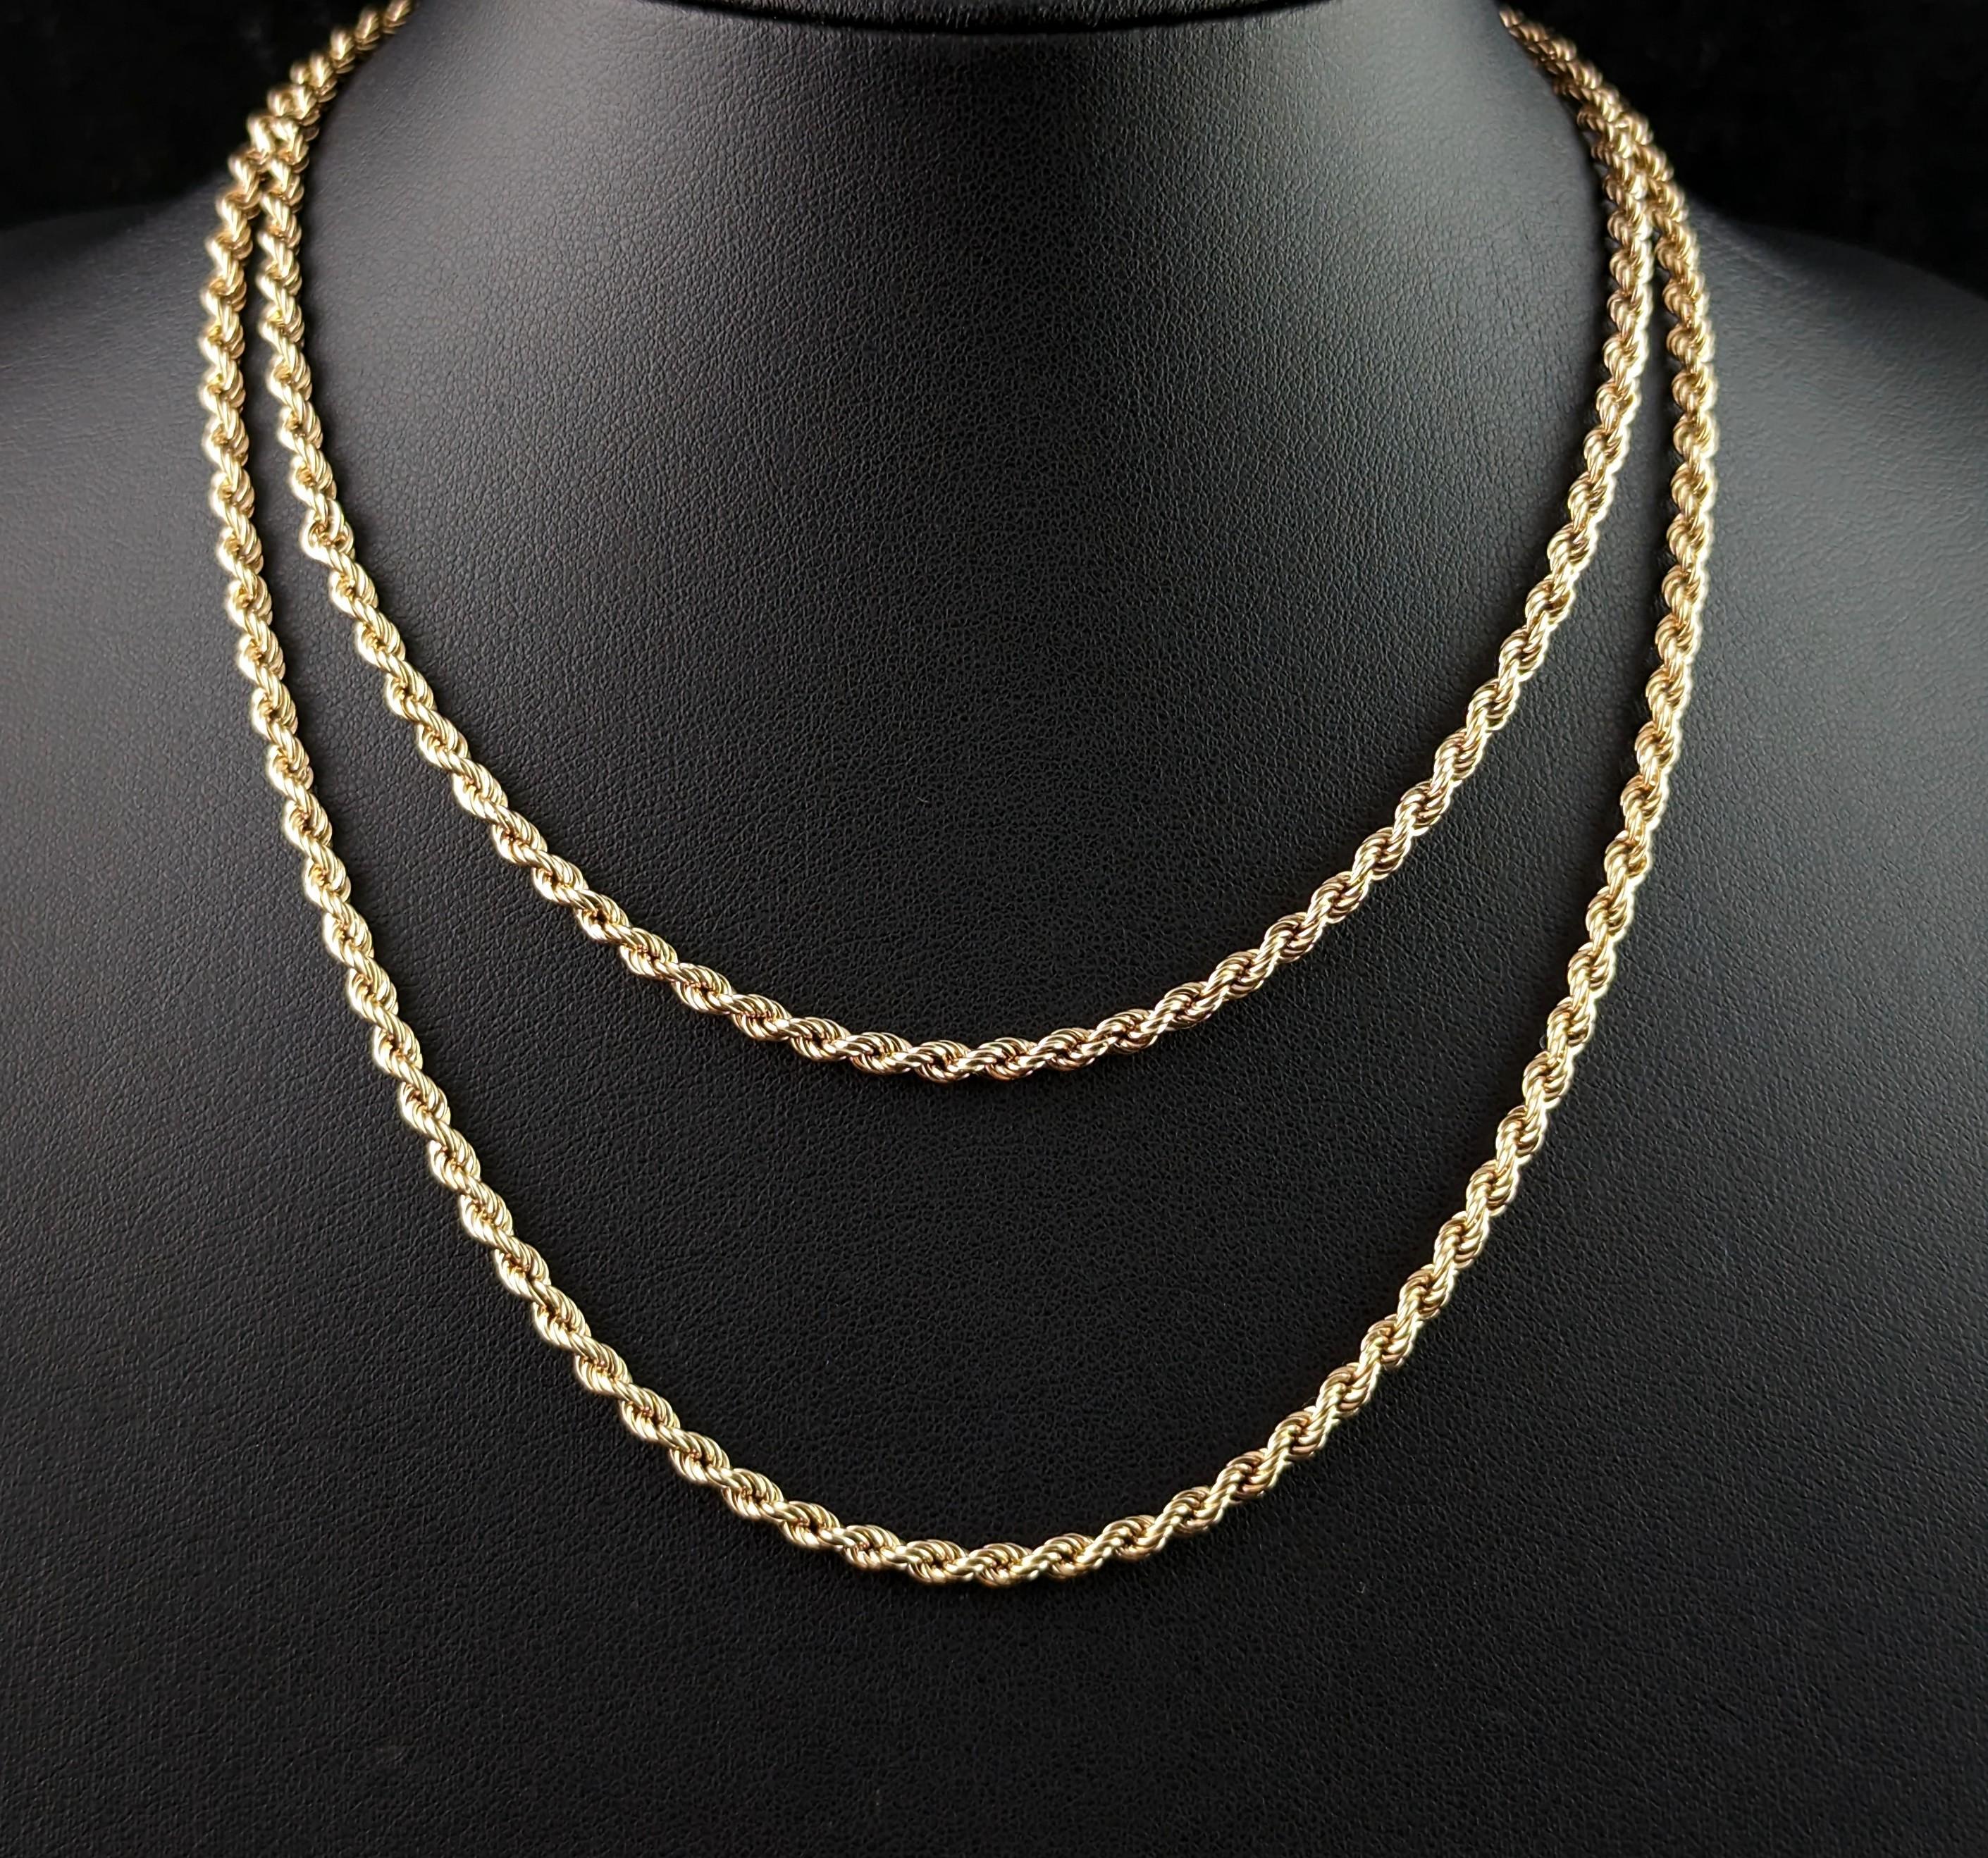 A vintage gold chain is such a great staple for all jewellery collections, this gorgeous vintage, 80s era 9kt yellow gold fancy link Chain necklace is a great choice.

Rope links in a rich 9kt yellow gold in a nice long wearable length.

This